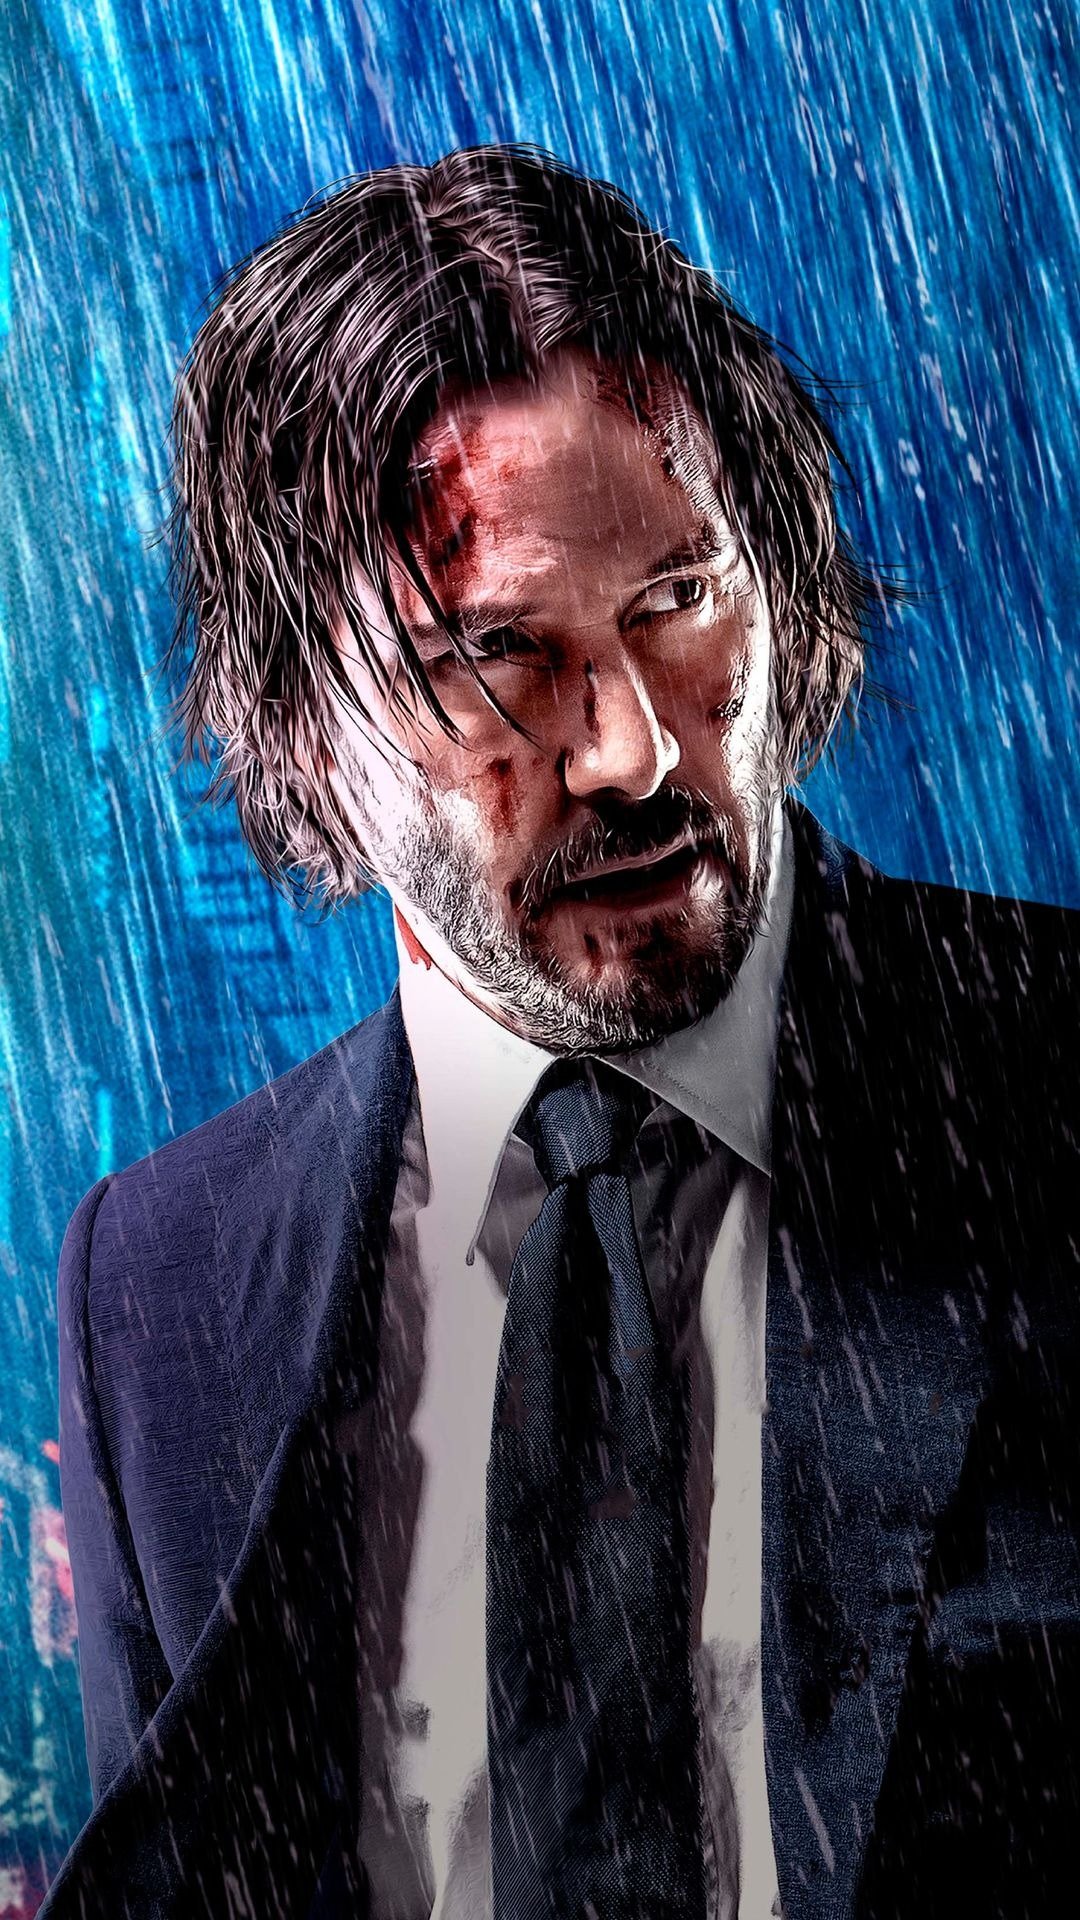 John Wick 5' to shoot back-to-back with 'John Wick 4' next year